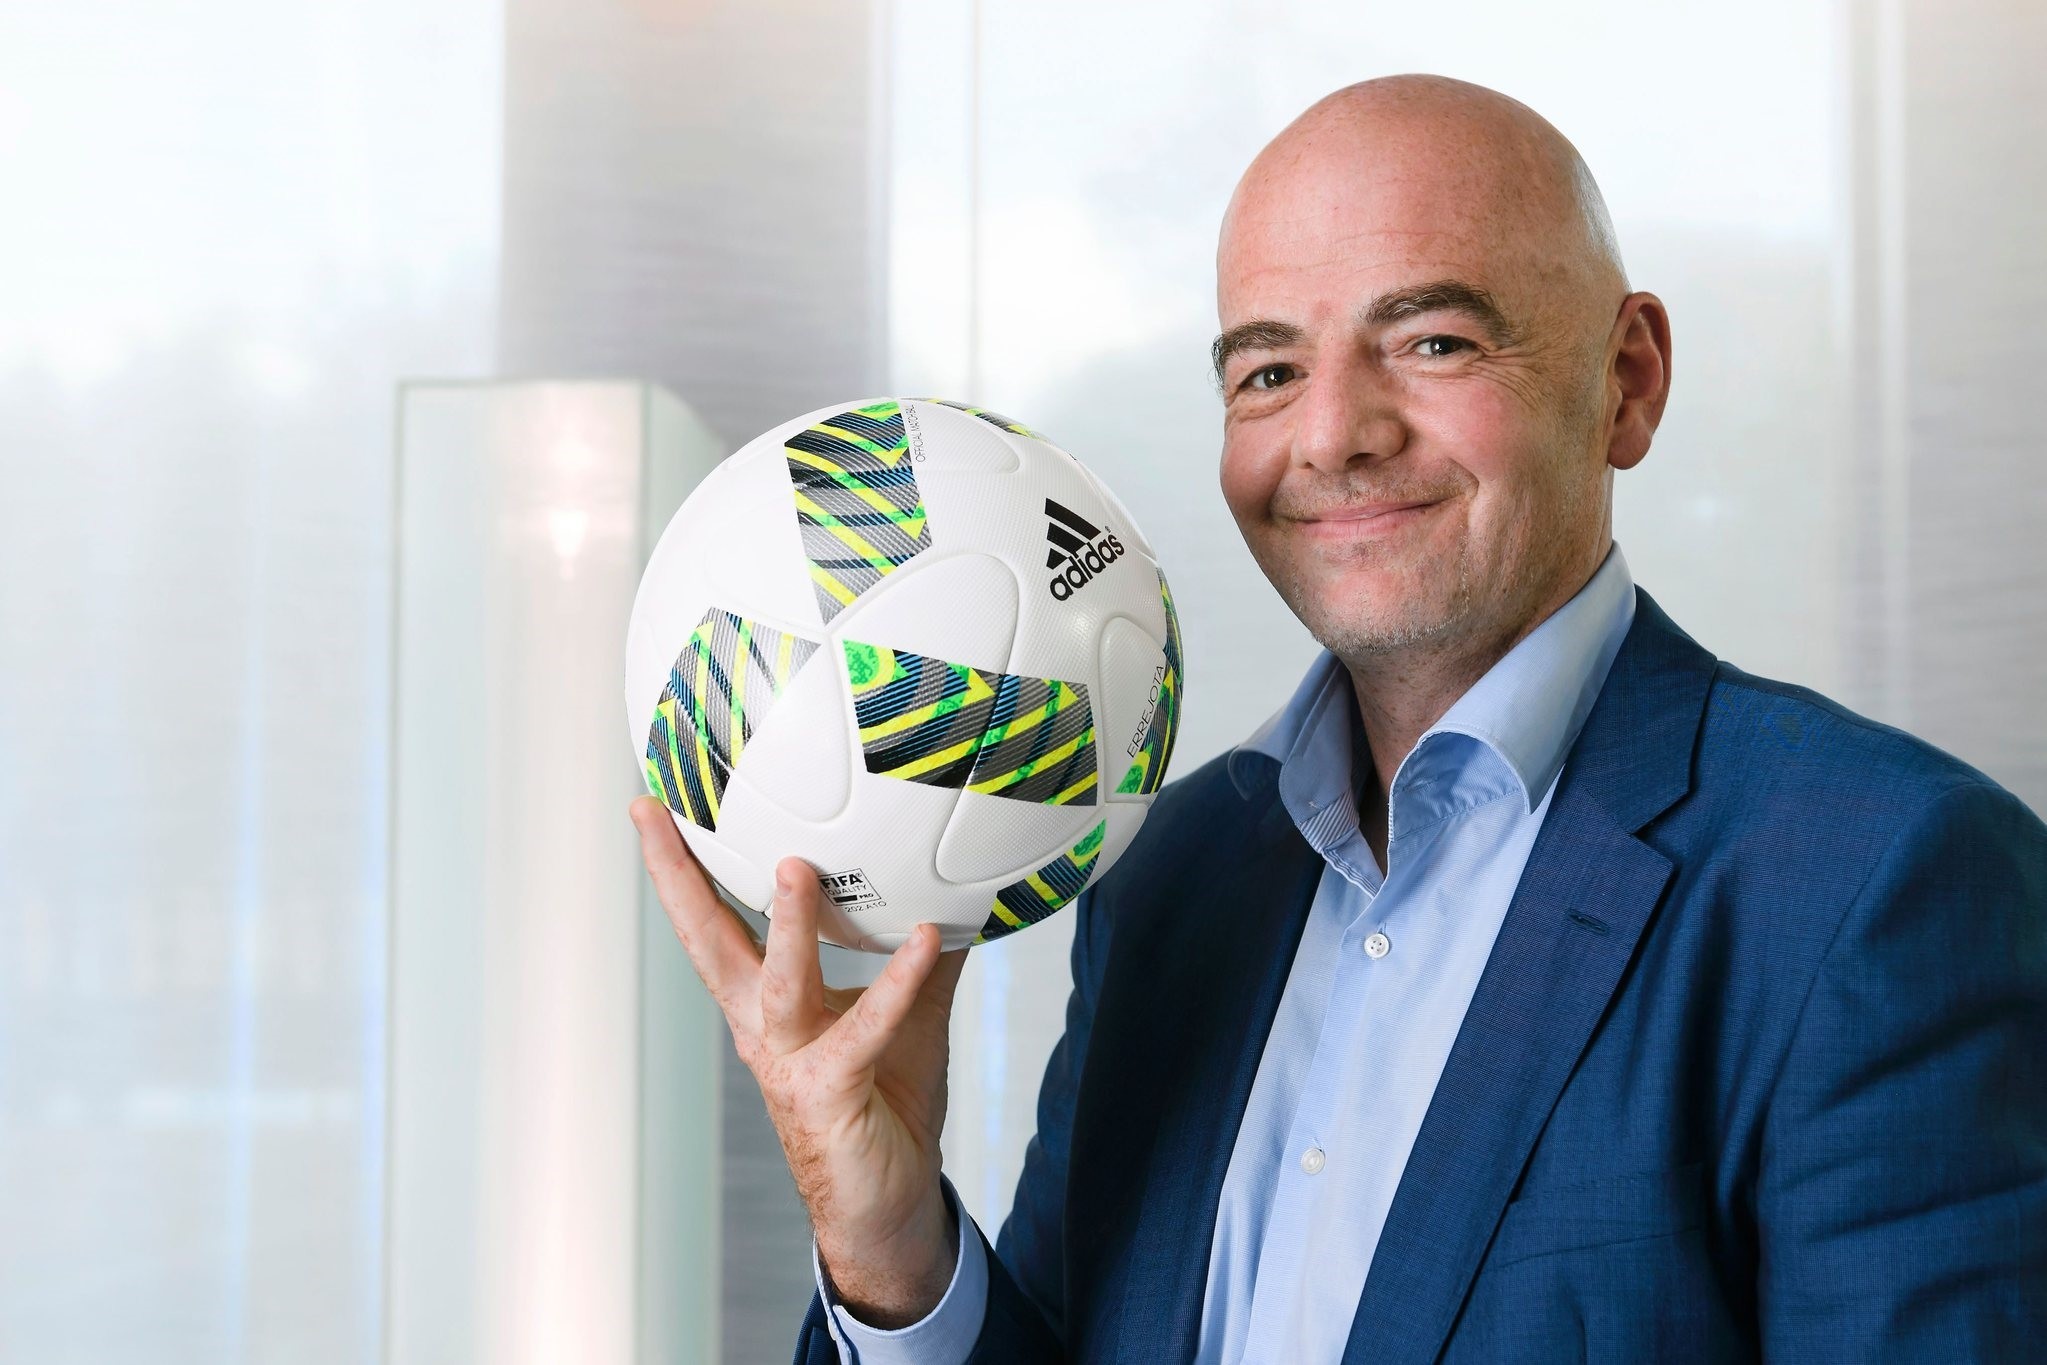 FIFA president Gianni Infantino poses for a picture during a interview with AFP on October 5, 2016 at the world football's governing body headquarters in Zurich. (AFP Photo)